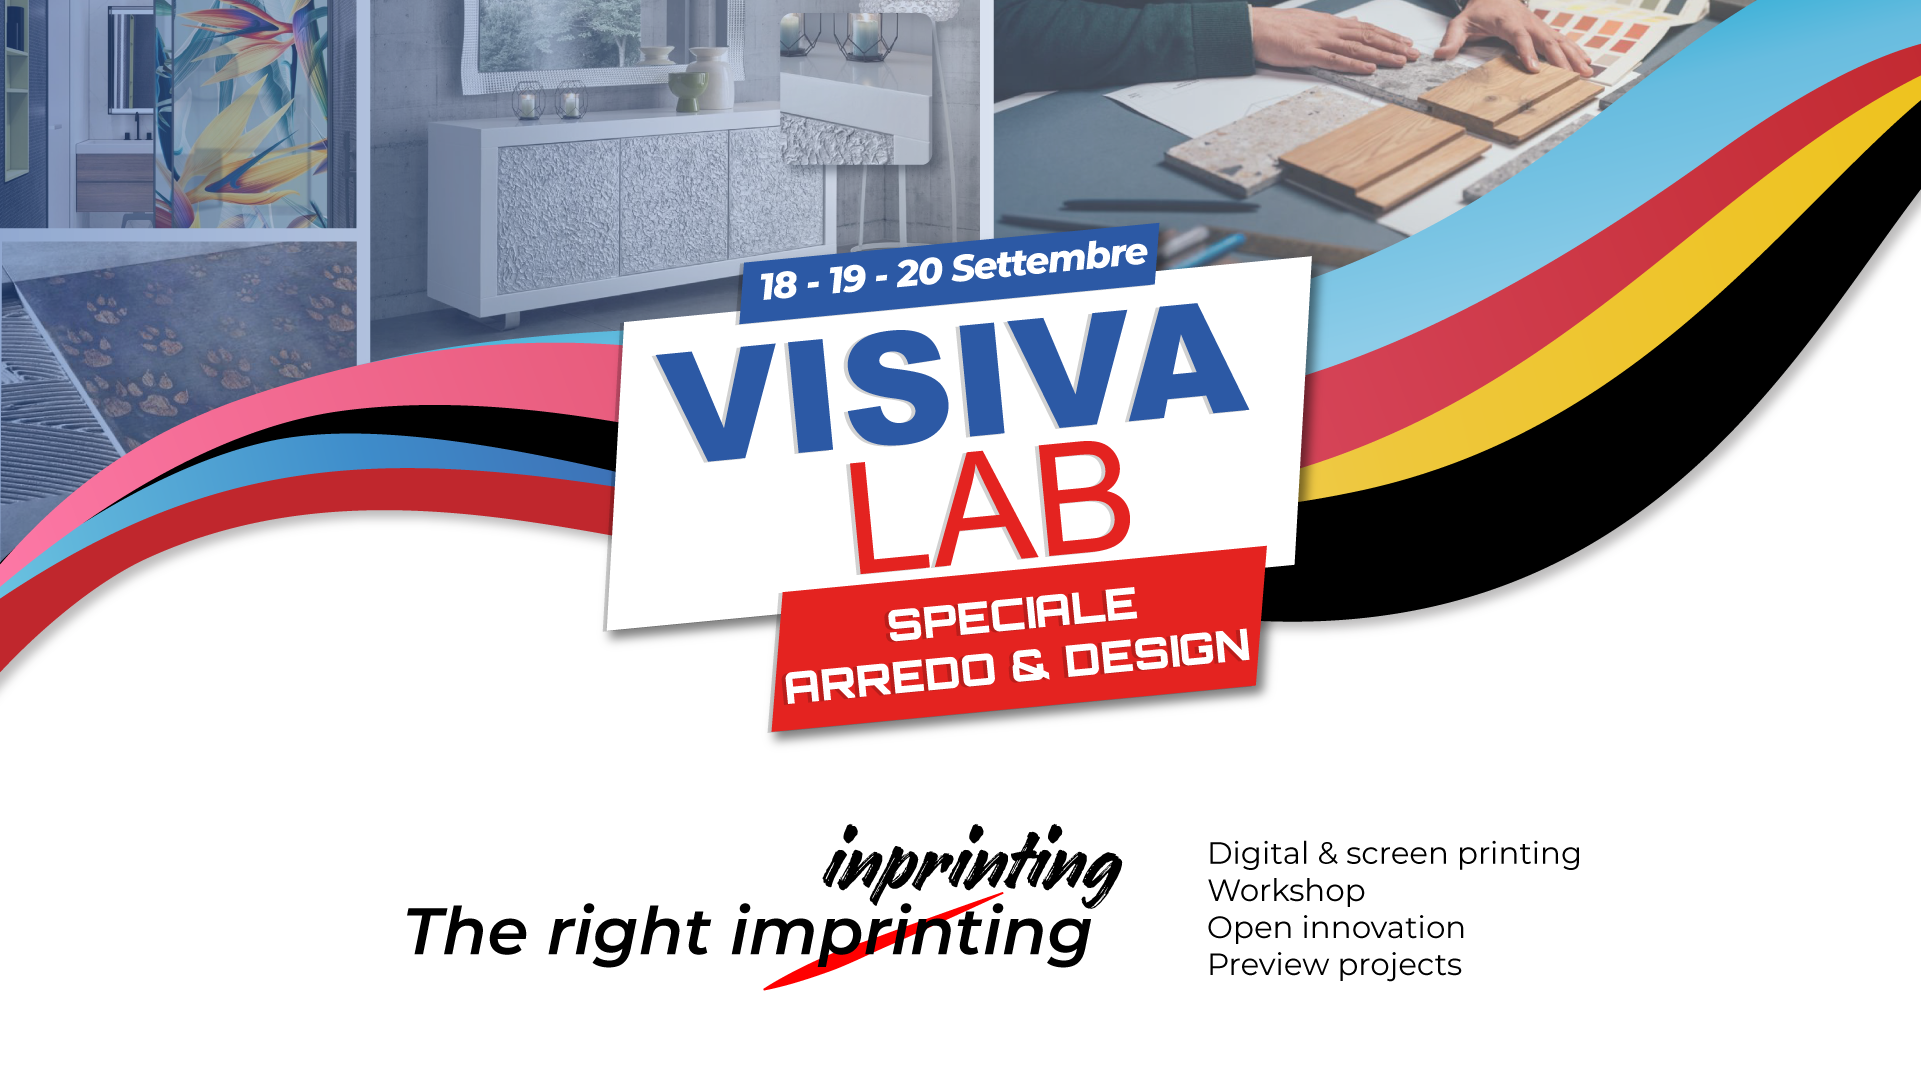 This logo promotes an event dedicated to furniture and design, called Visiva Lab, which will take place from September 18 to 20.